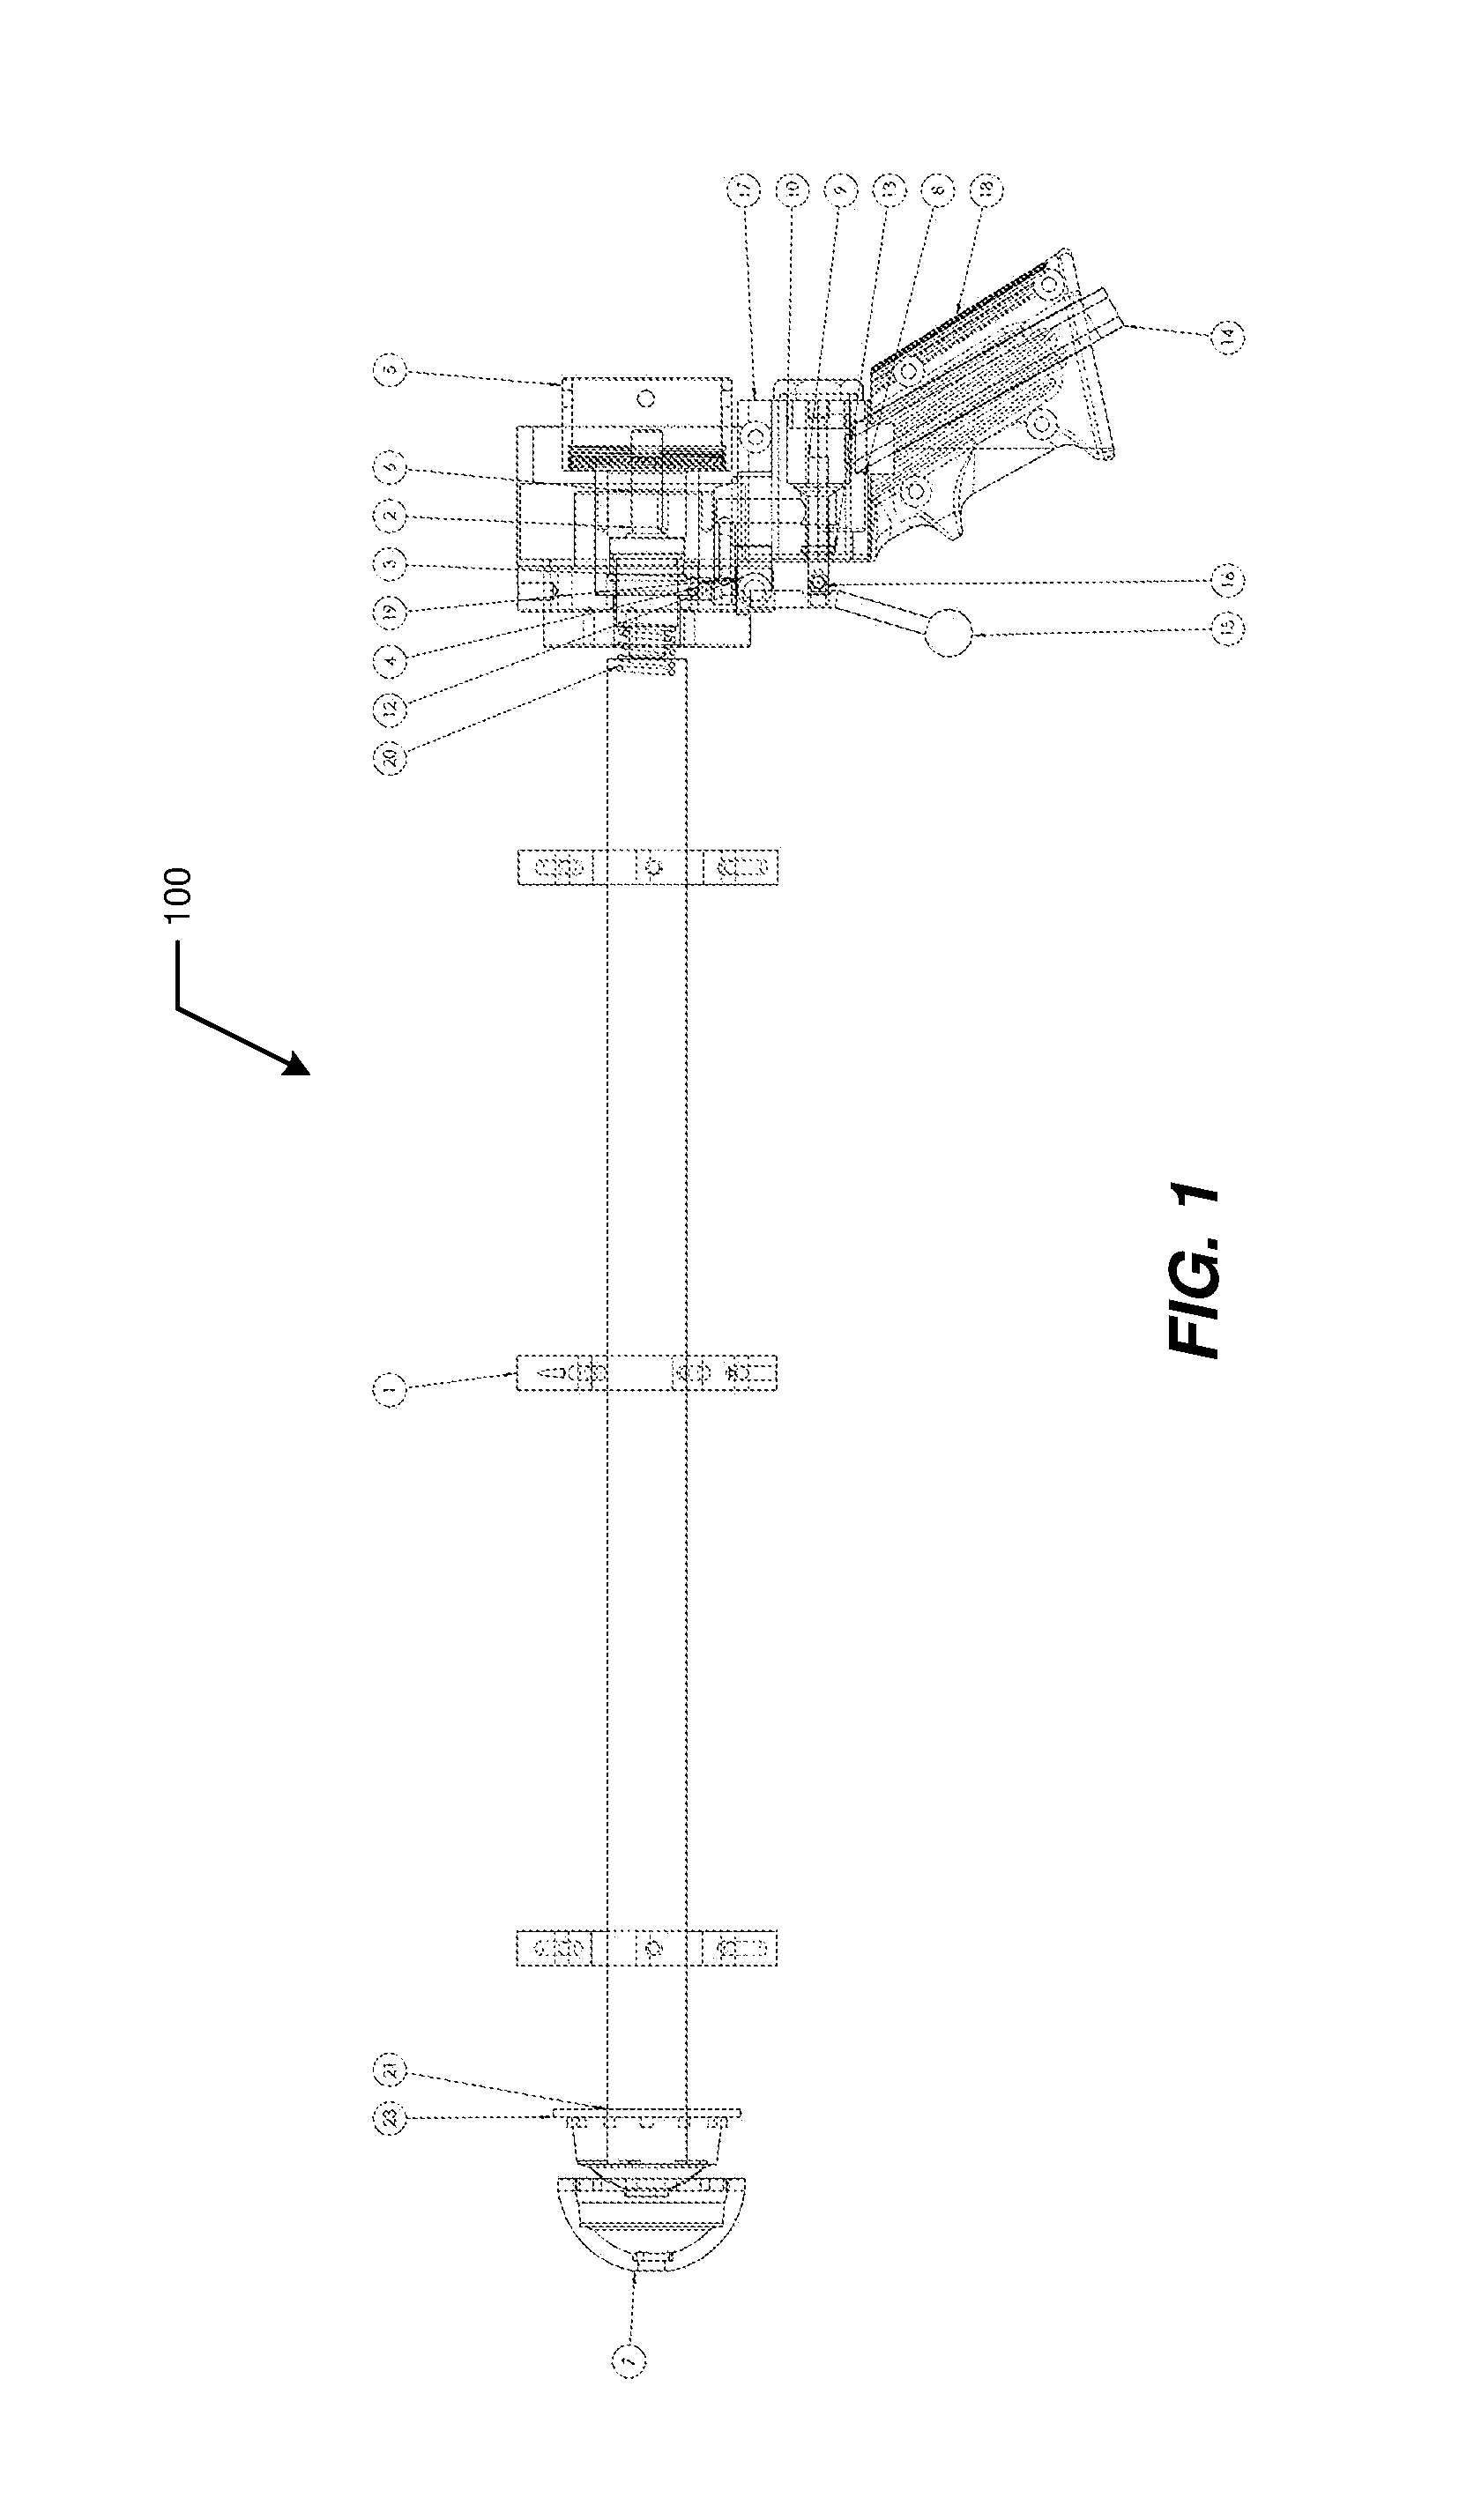 Prosthesis revision systems and methods